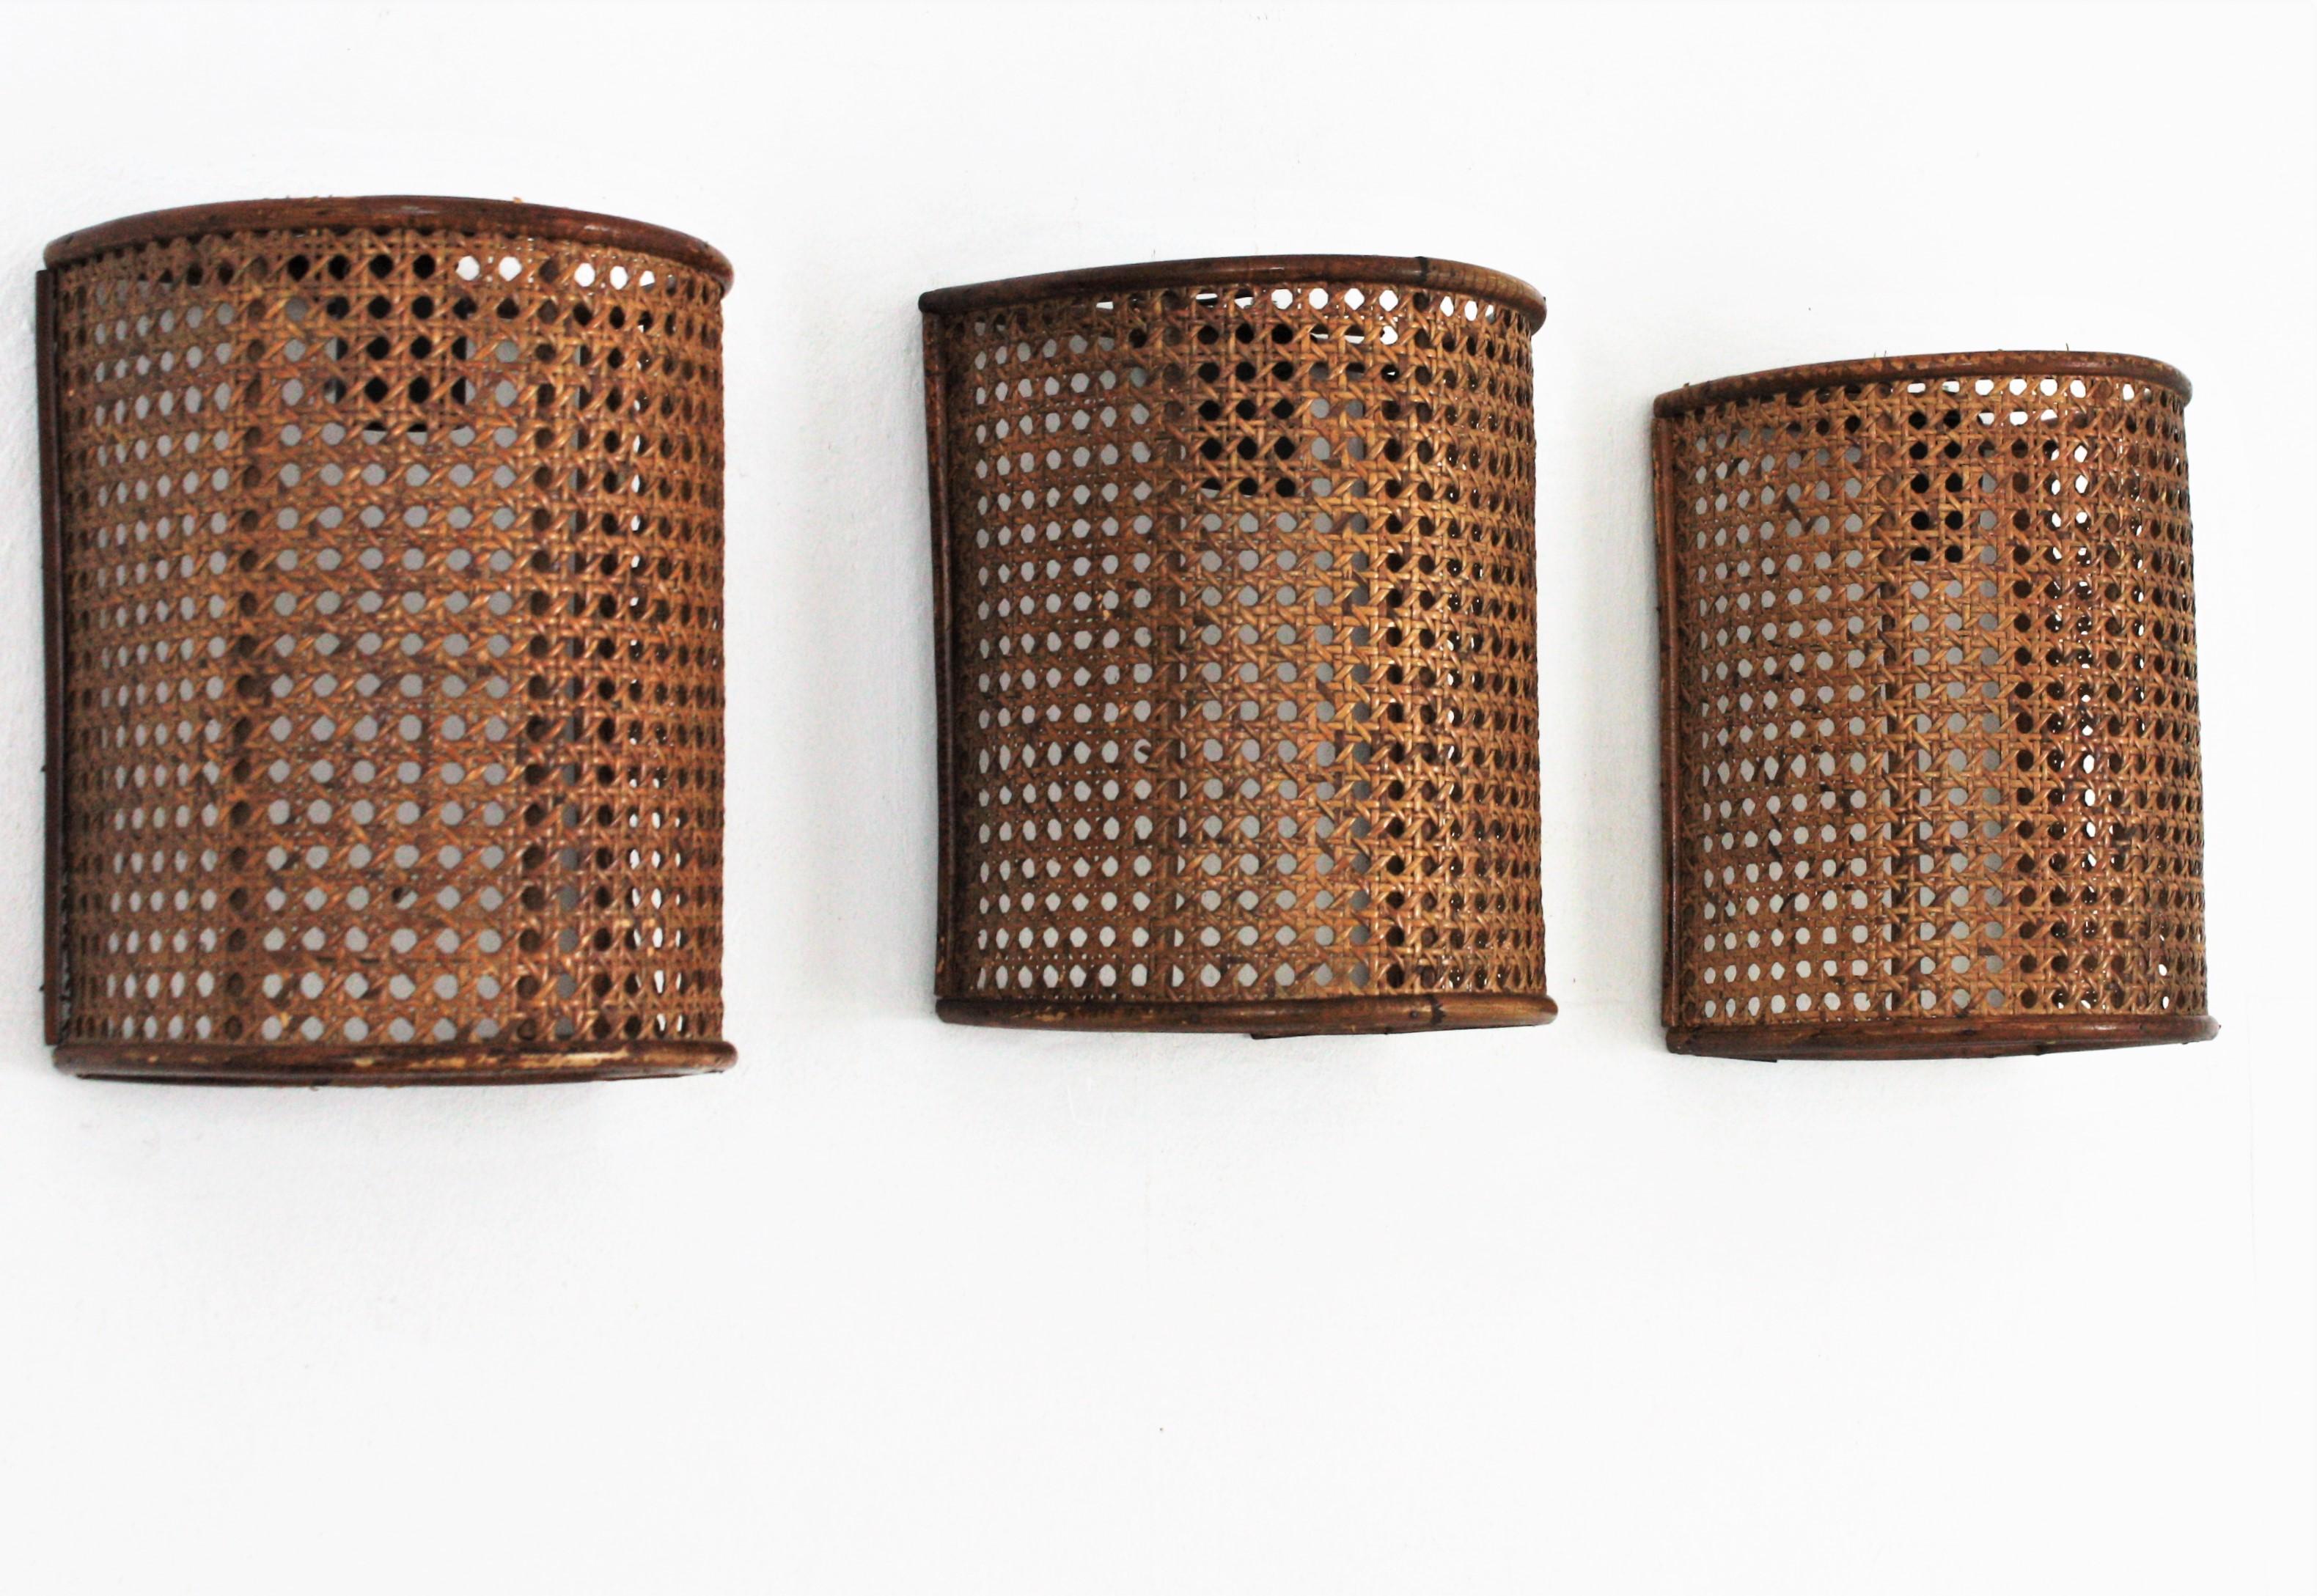 Midcentury Woven Wicker Weave and Rattan Wall Sconces, Set of Three 1